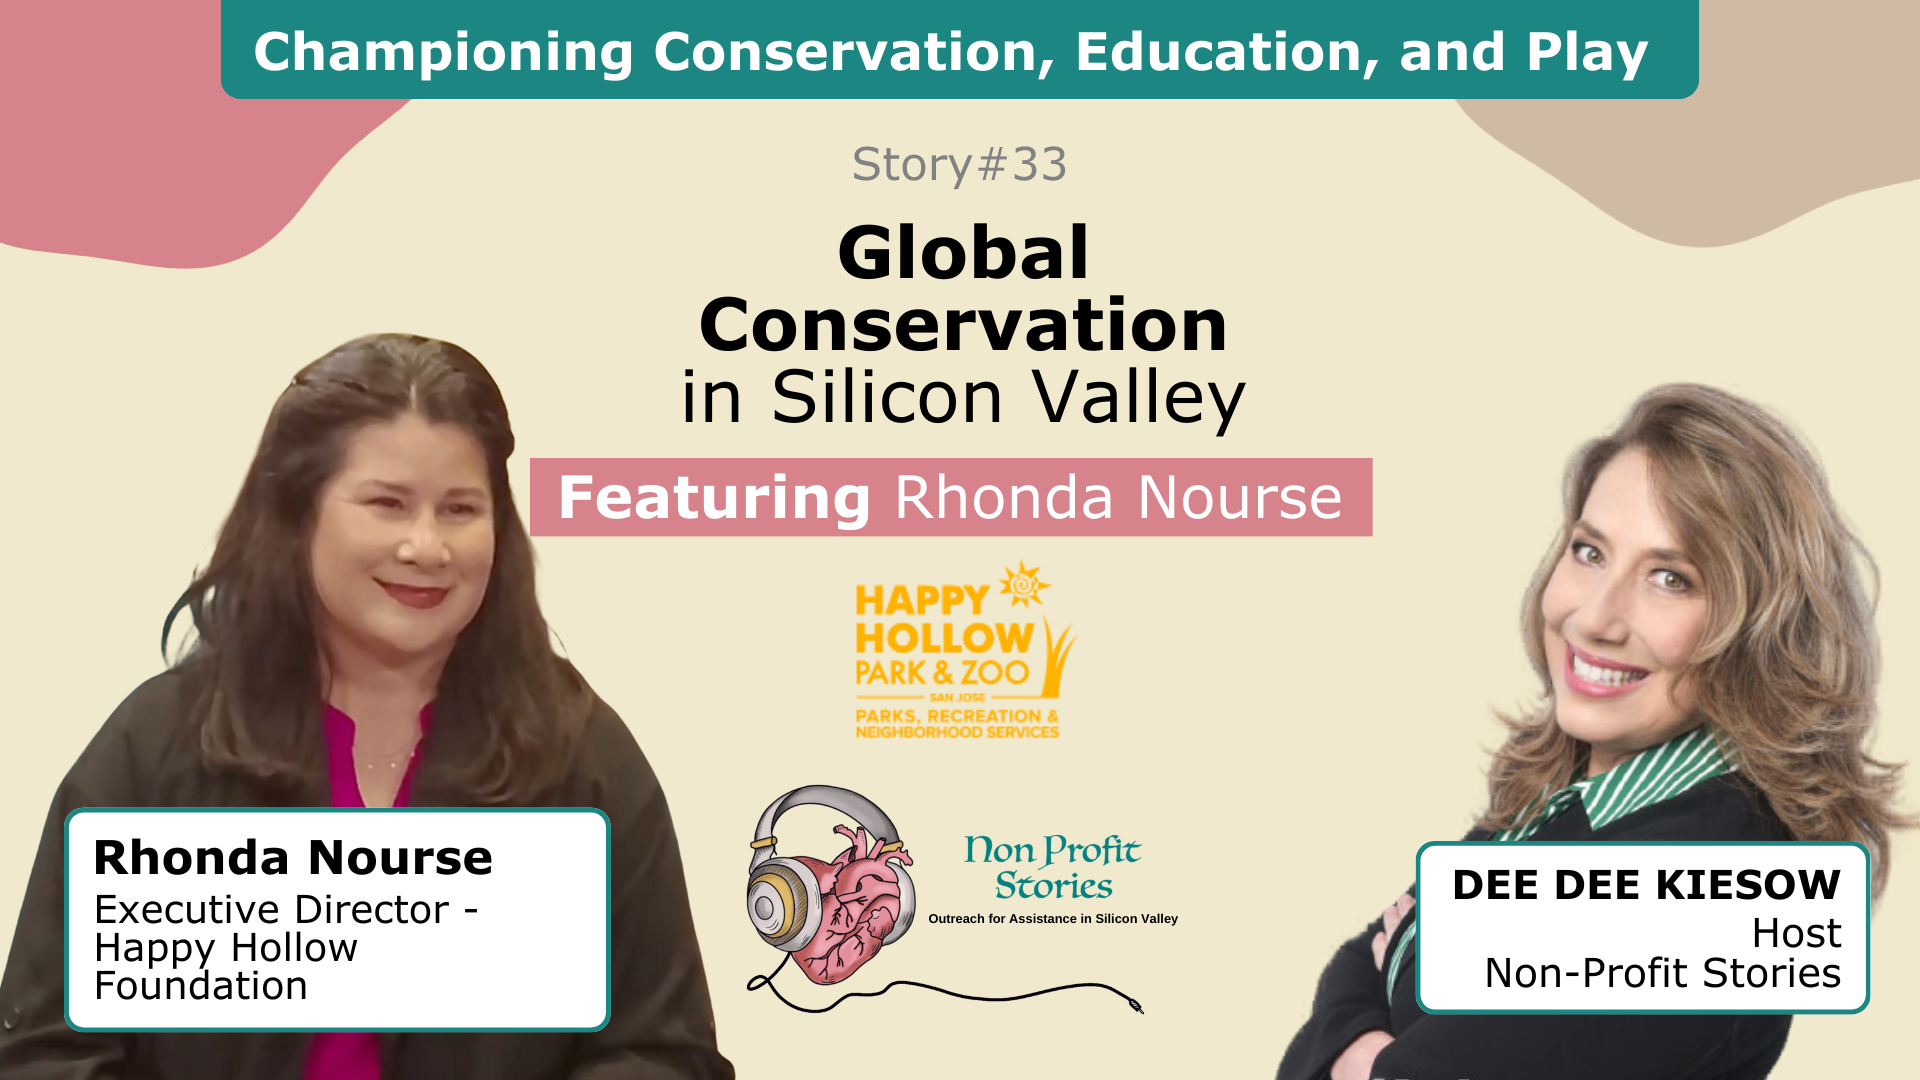 Global Conservation: Championing Conservation, Education, and Play in Silicon Valley